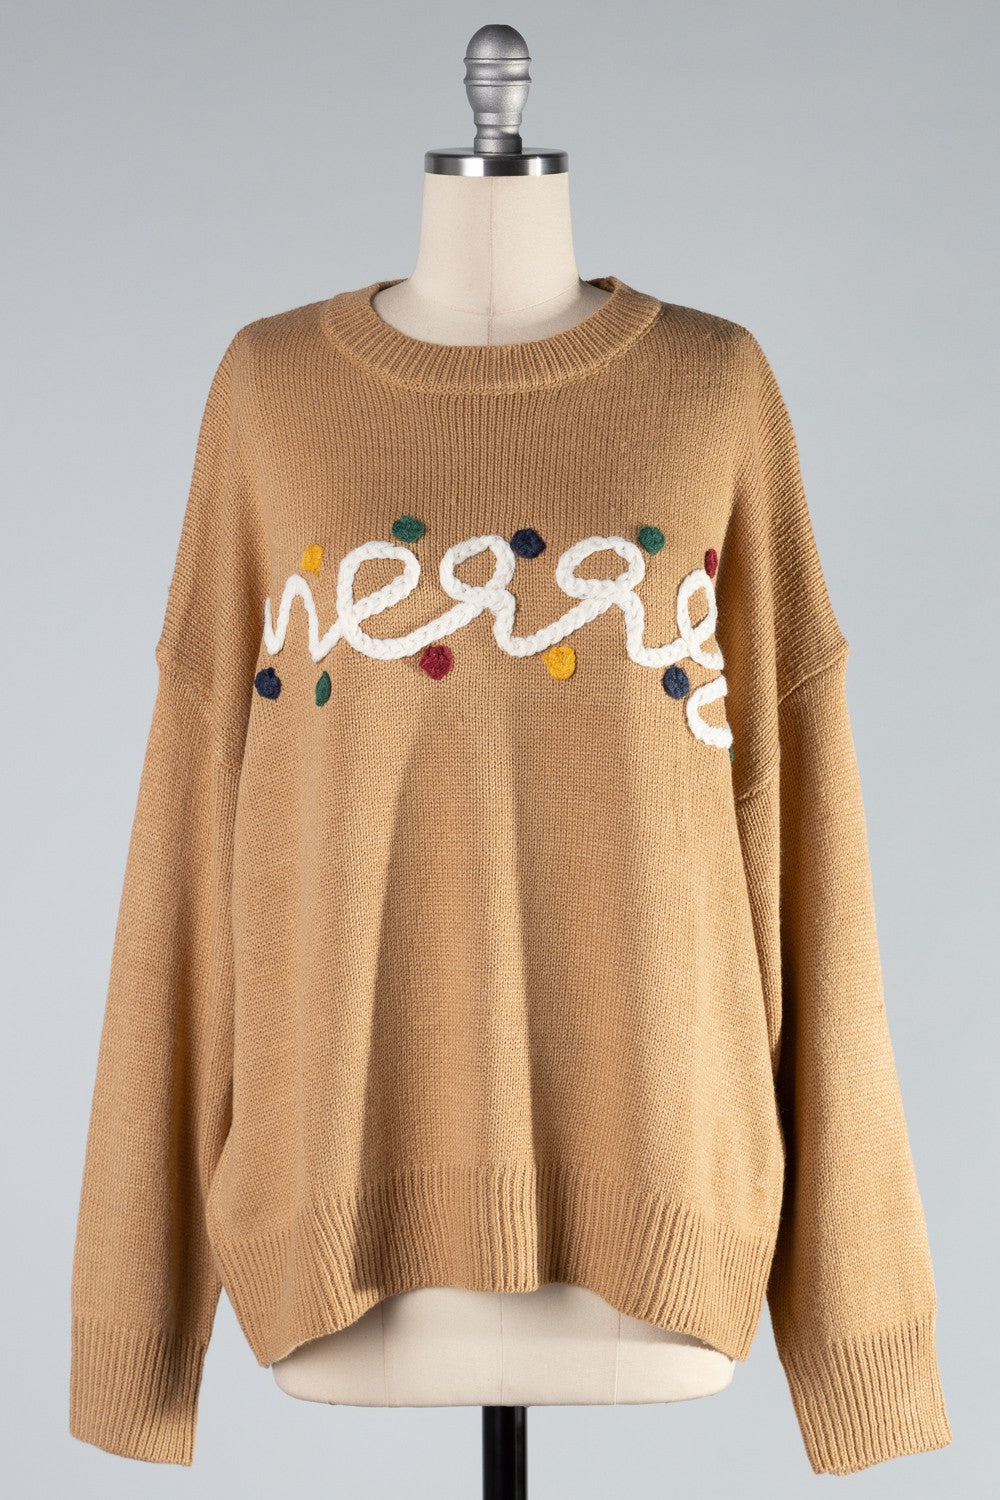 Merry Holiday Sweater In Tan